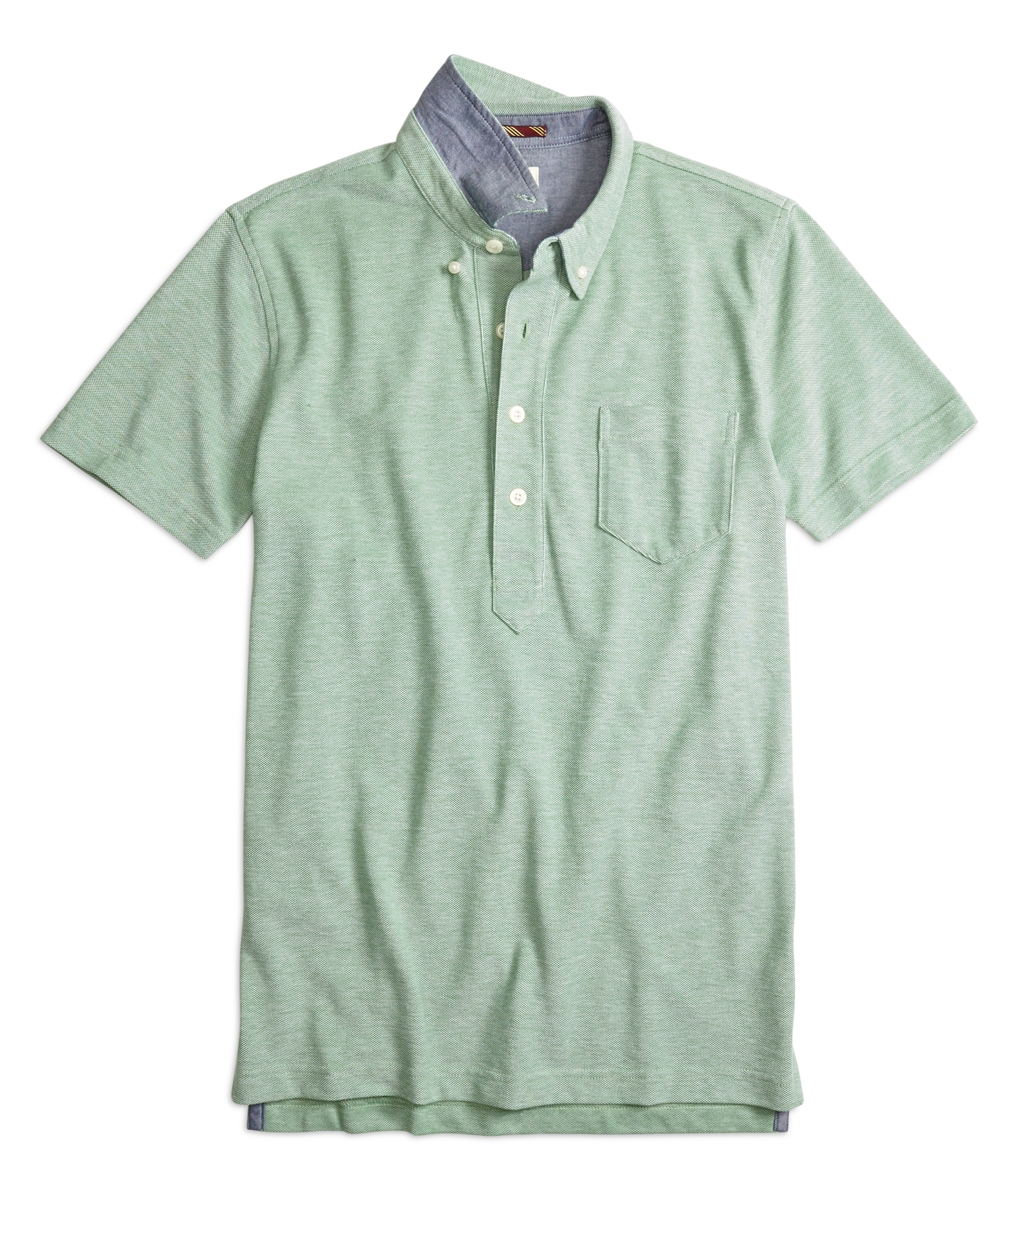 Lyst - Brooks Brothers Contrast Collar Polo Shirt in Green for Men